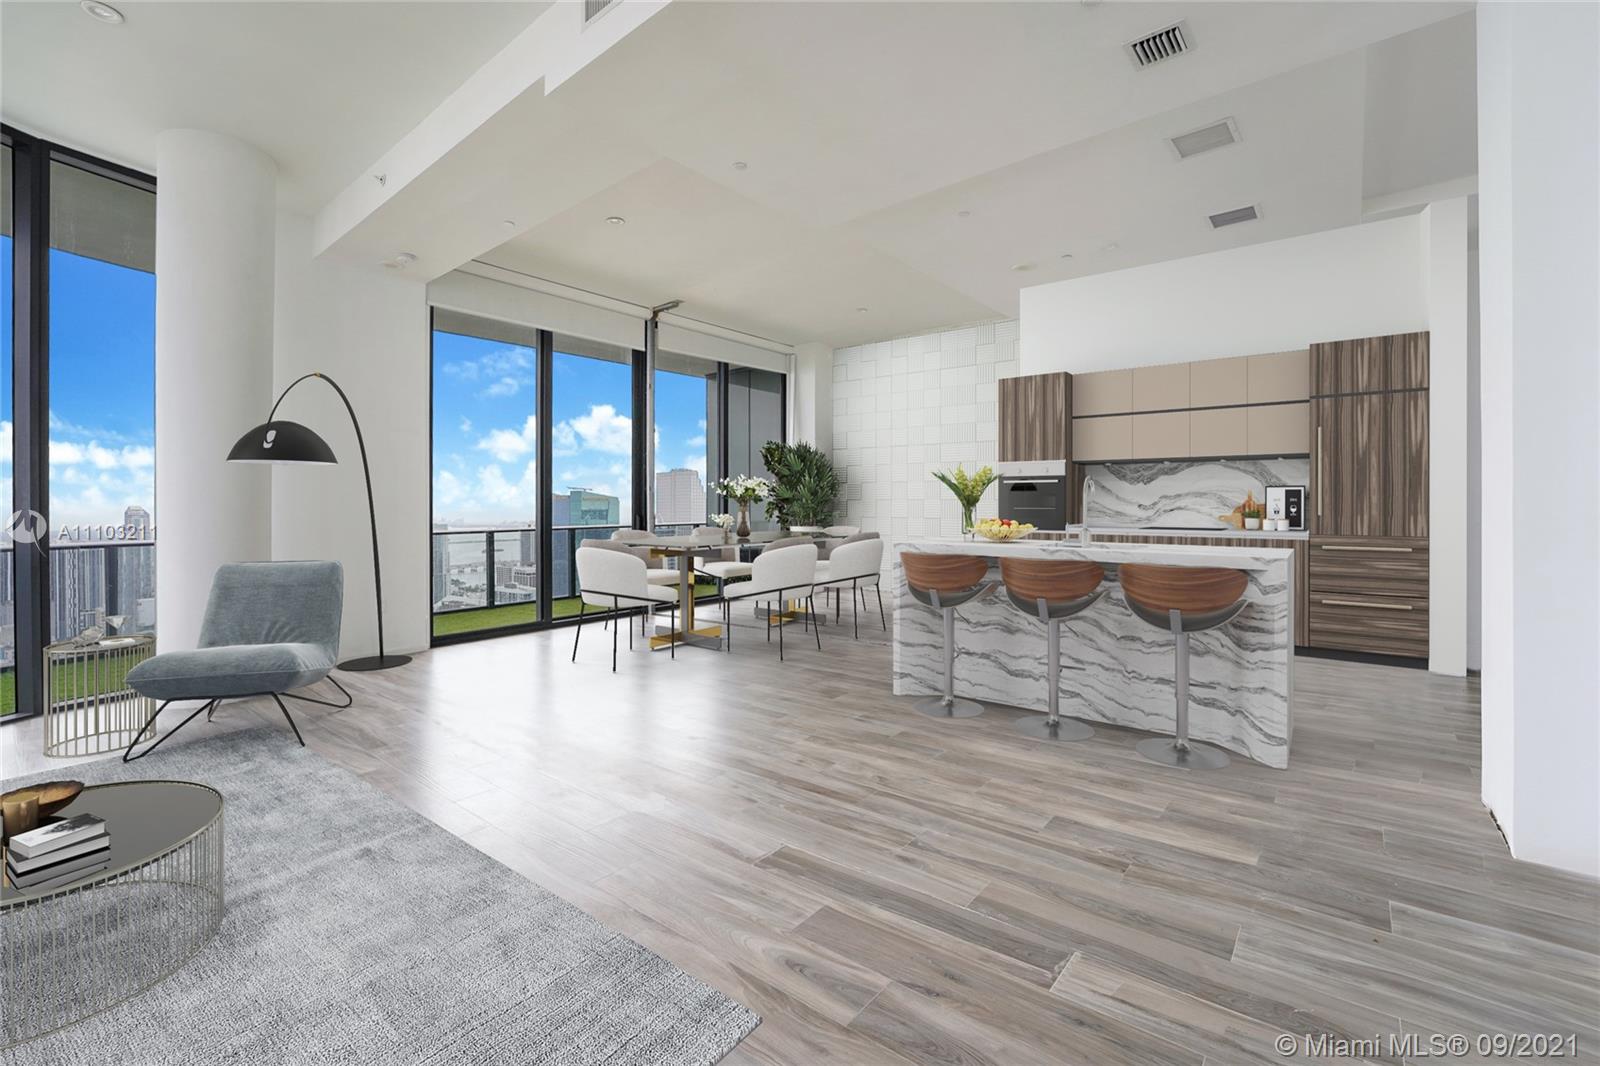 Create your own space! Take advantage of breathtaking views from the impressive 12-foot floor-to-ceiling from the  57th Floor. Huge 1,800+ square feet, 4 Parking spaces. What more is there to ask for? Must see to believe. Can combine units to make a total of over 6,377+ SQ FEET! the unit is vacant ready for you.